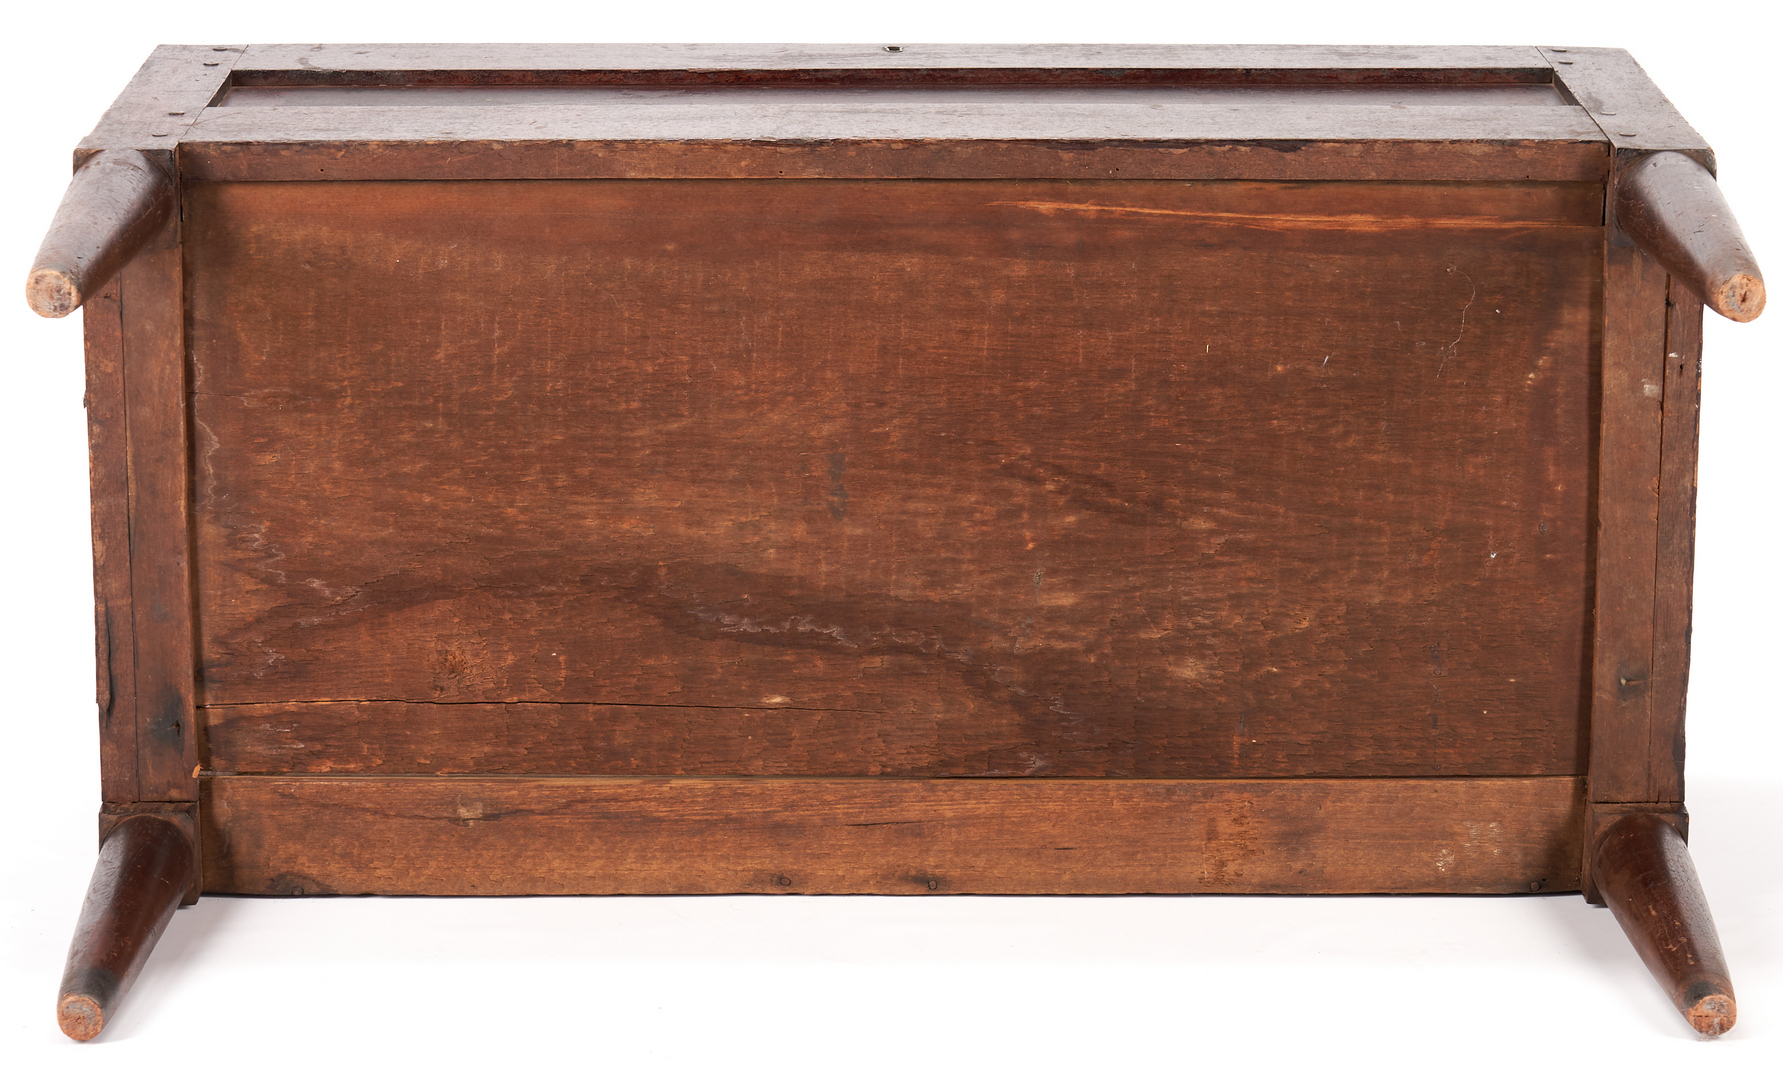 Lot 129: Southern Walnut Blanket Chest on Tall Tapered Legs, Old Surface